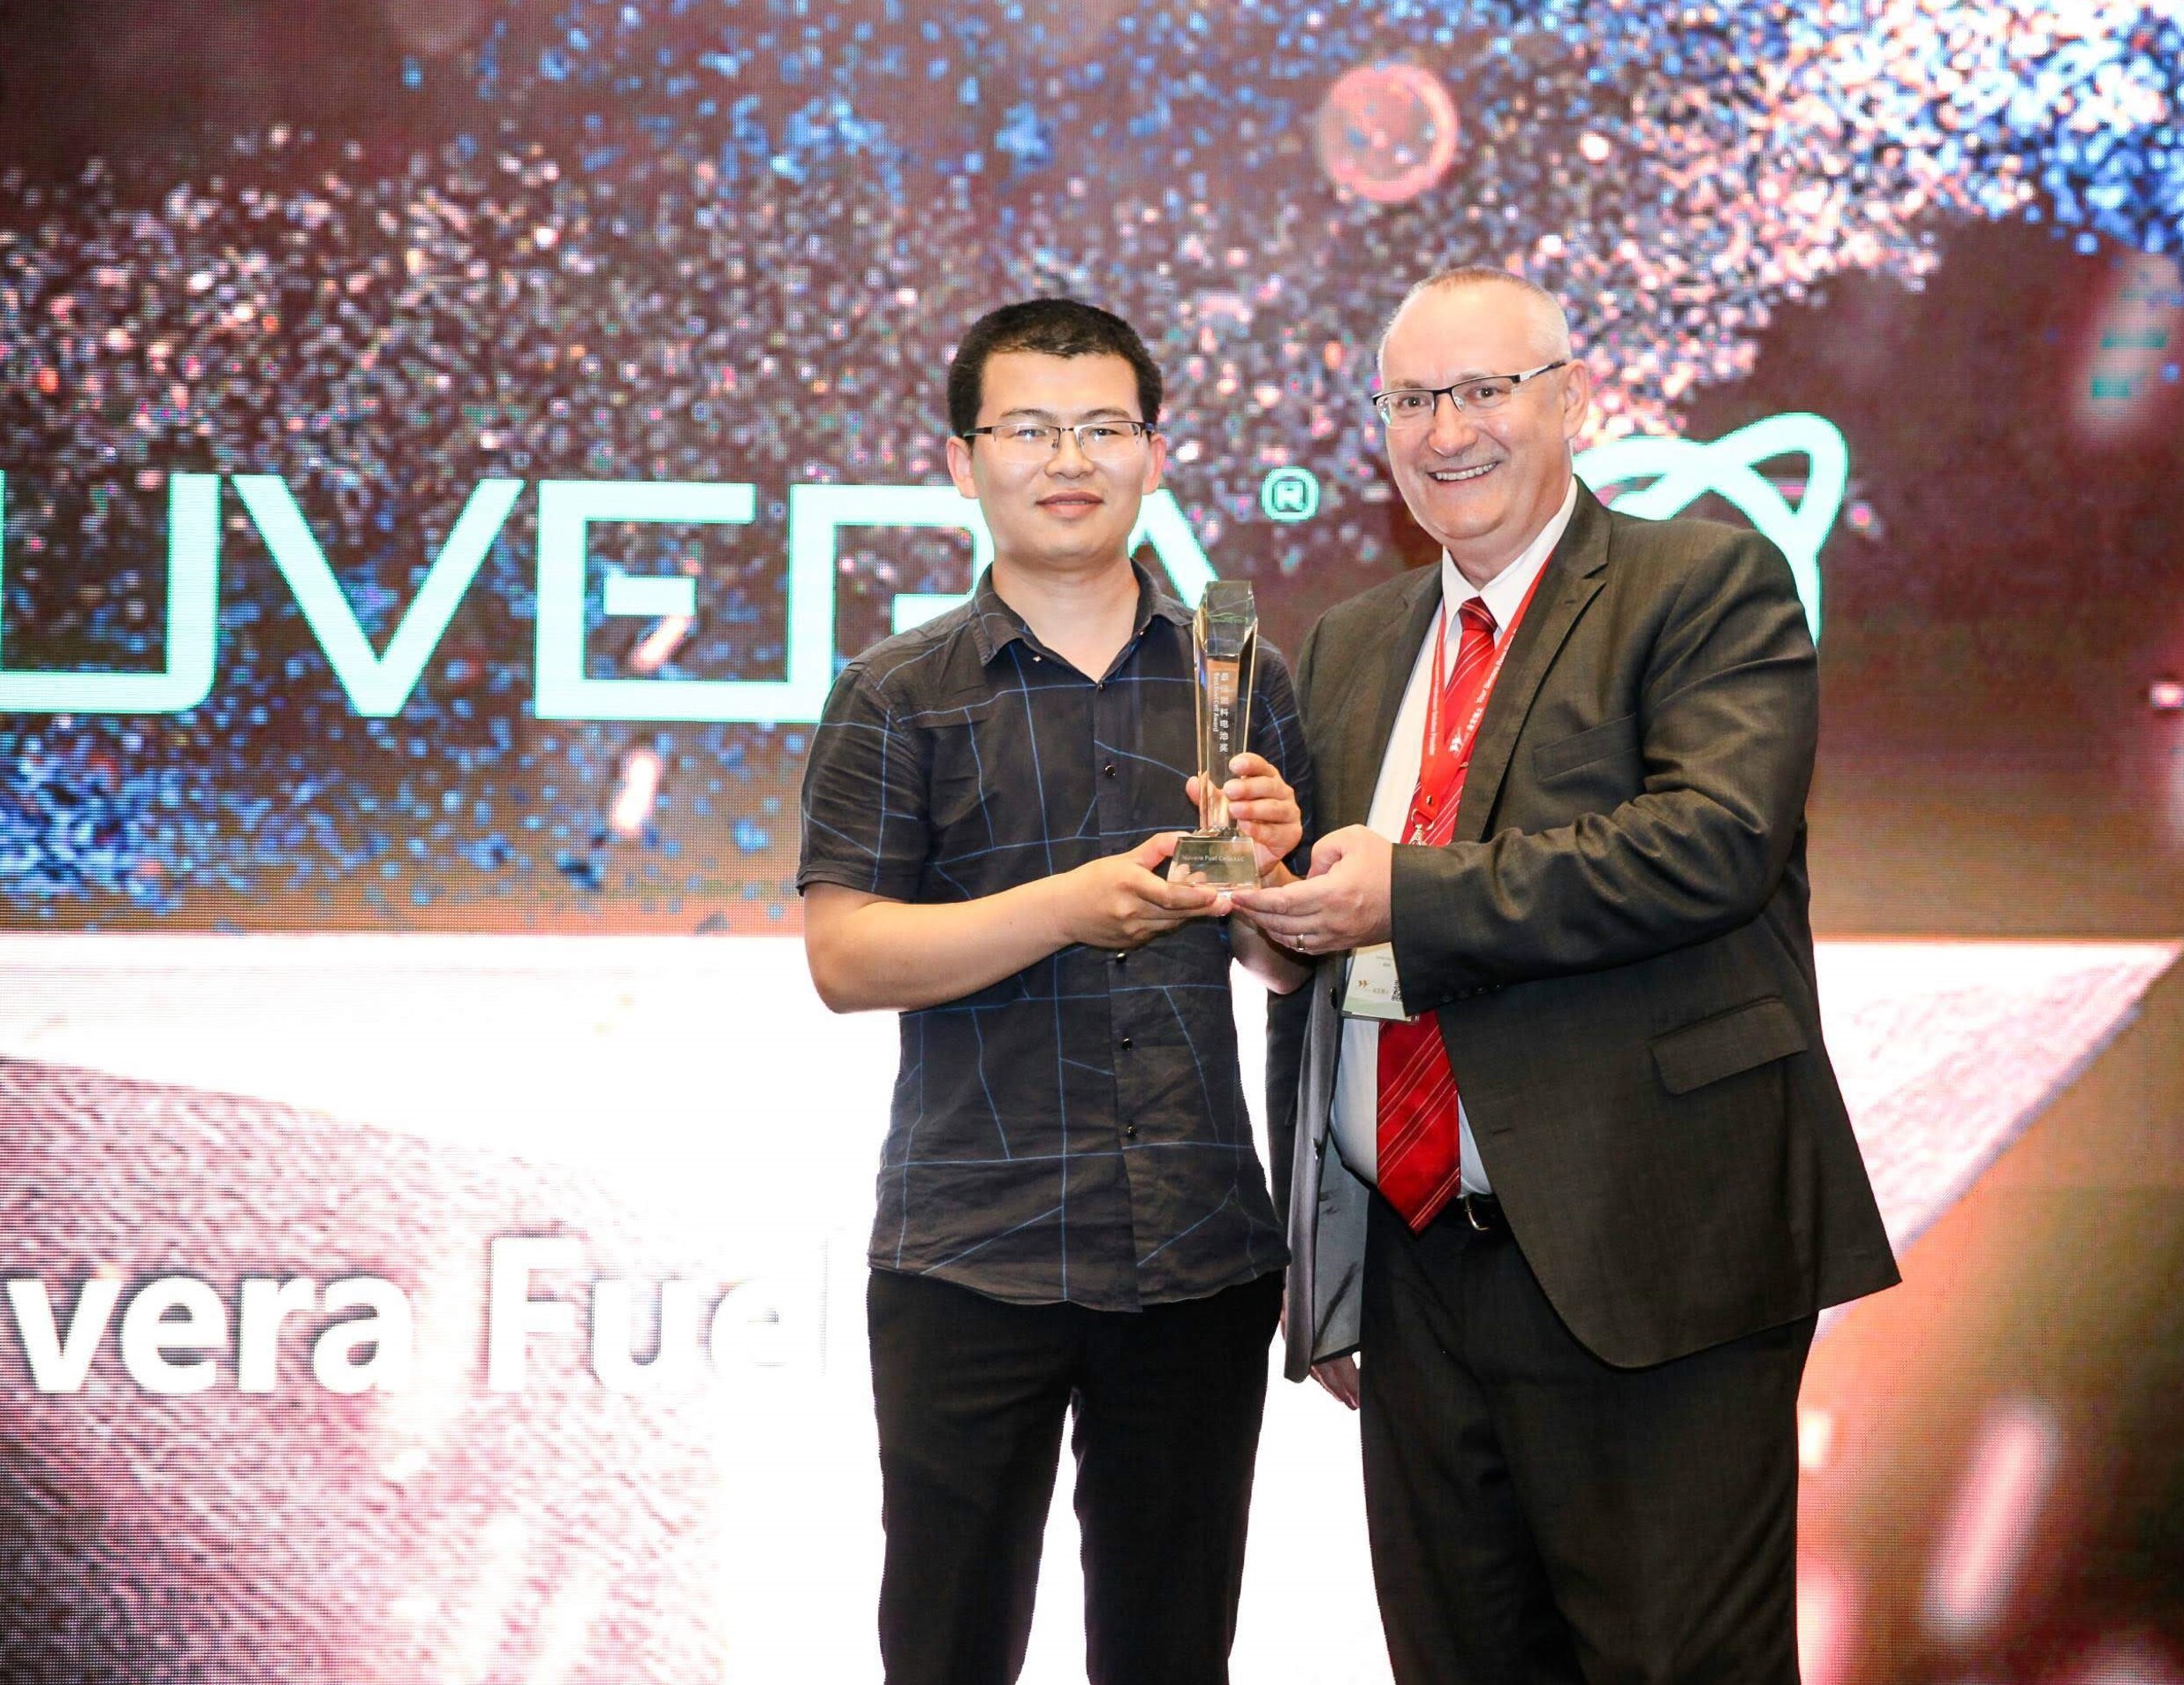 Nuvera Best fuel Cell award